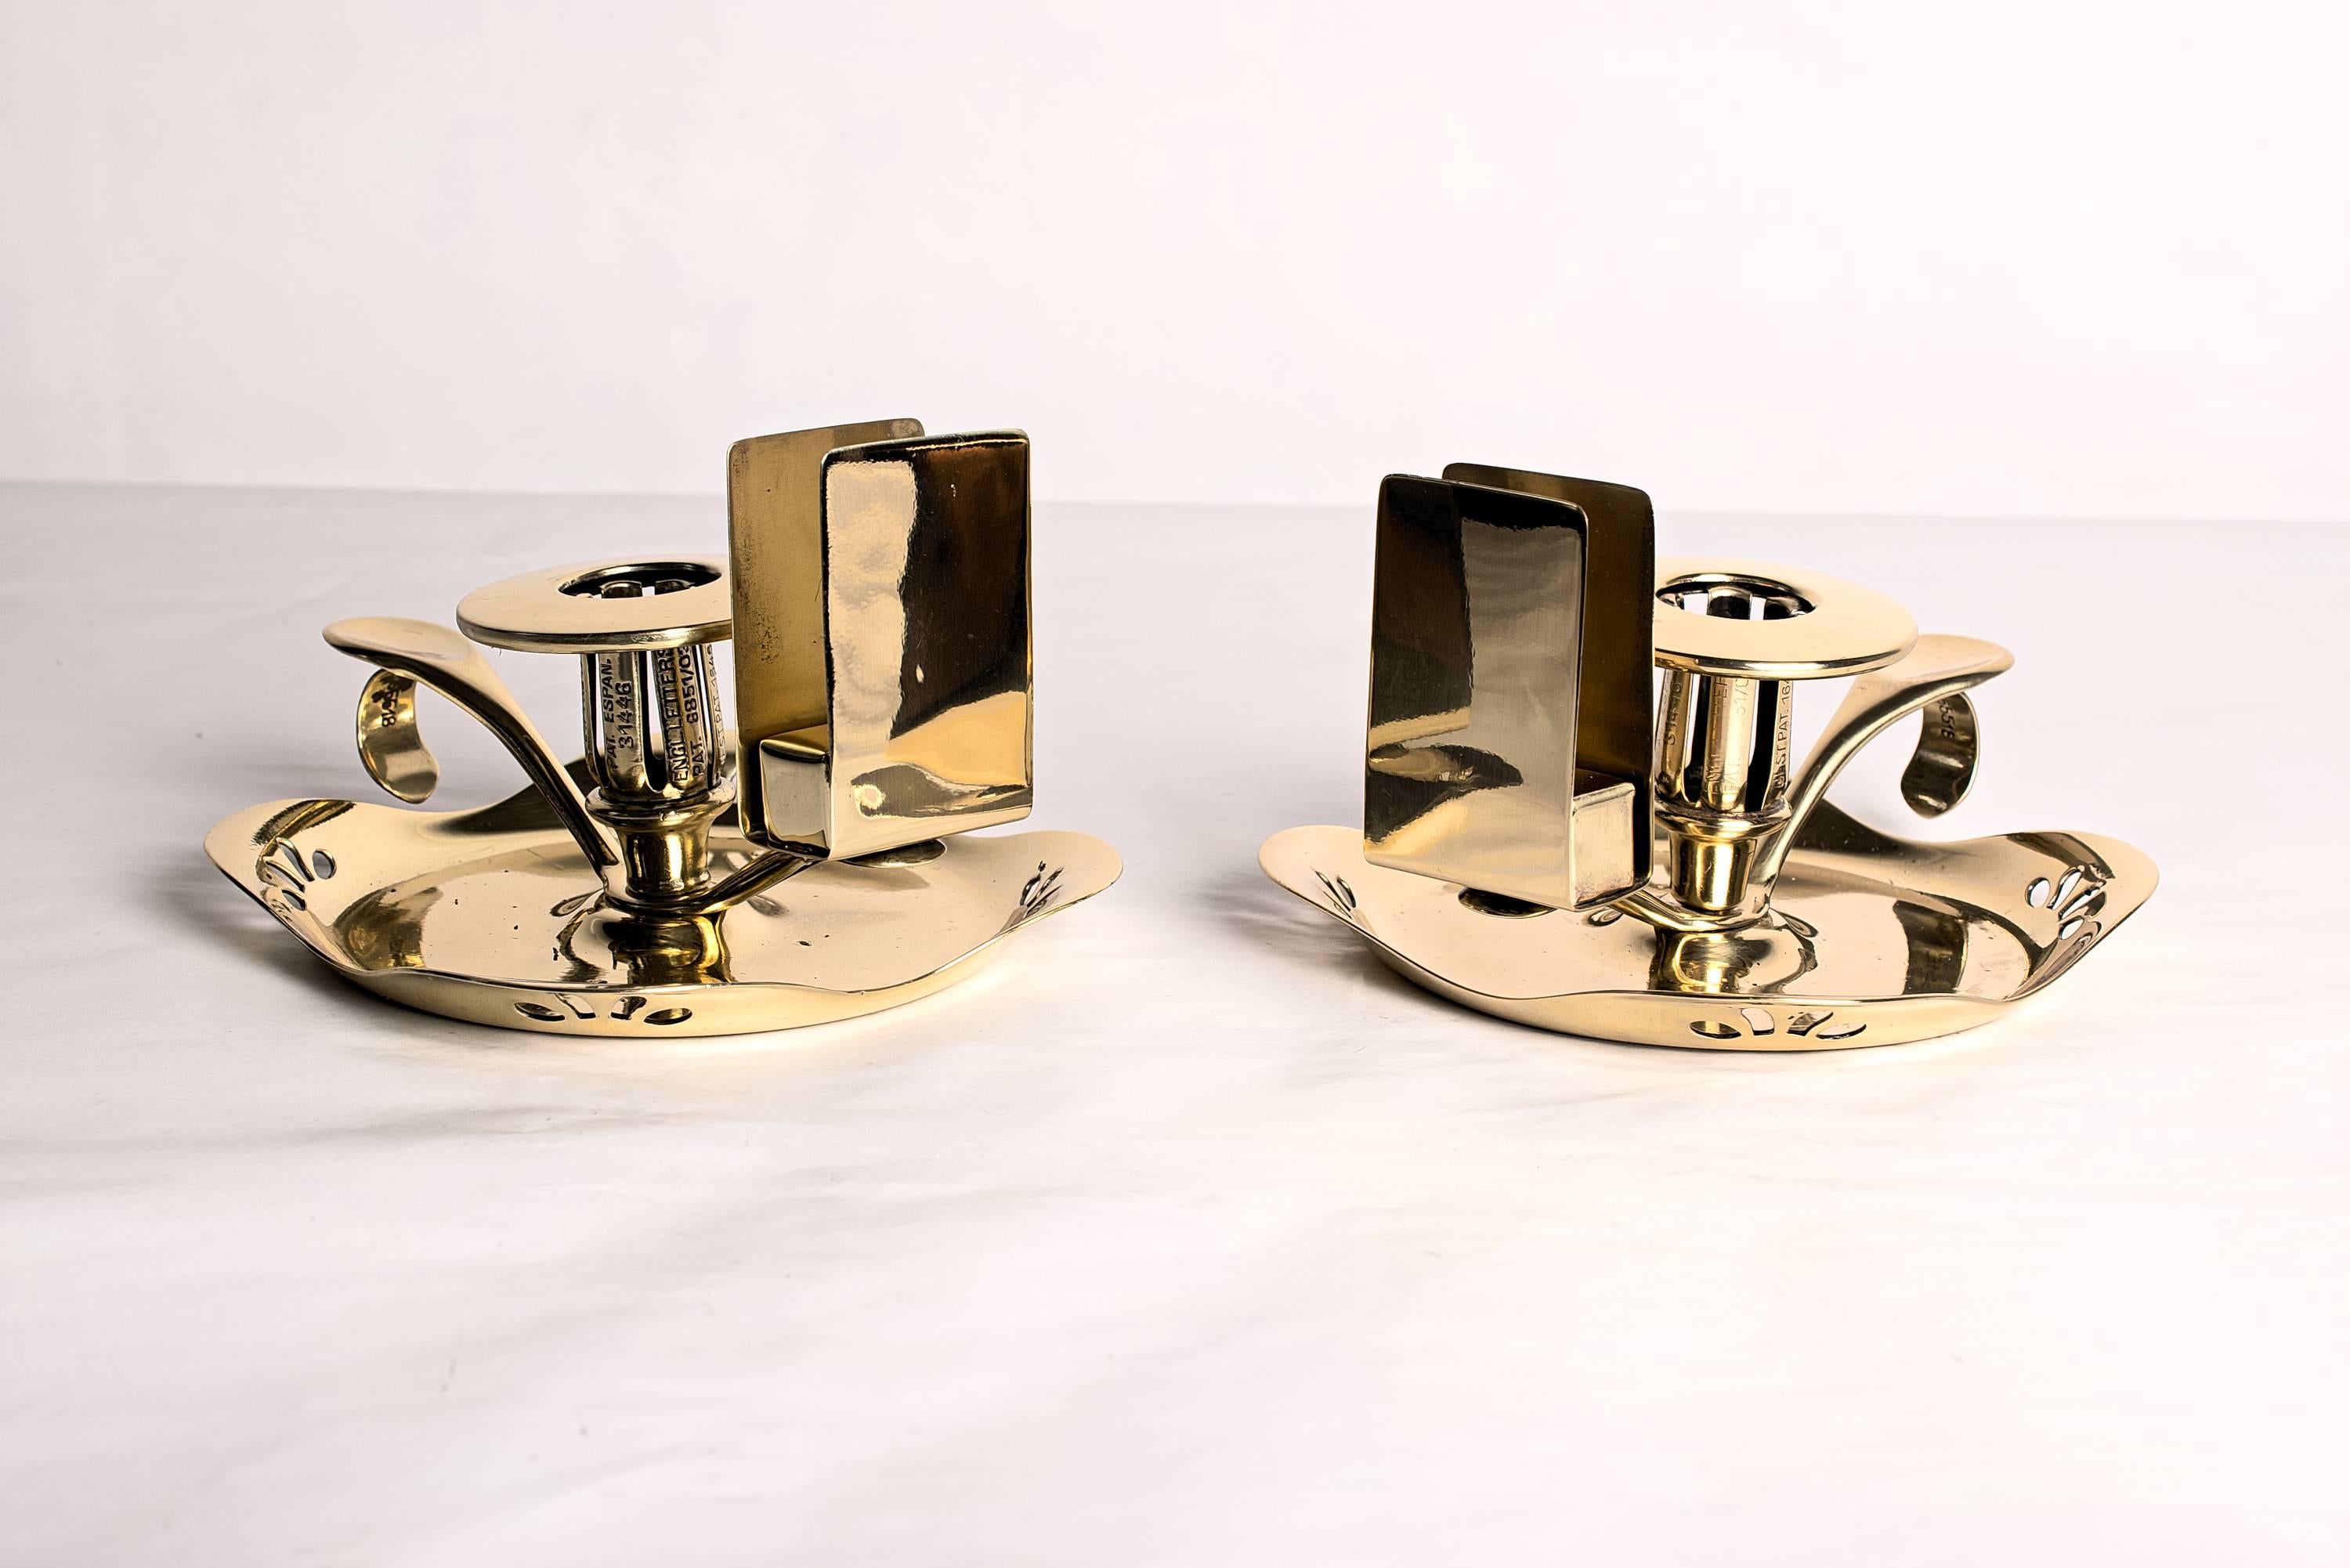 Two brass candle and match holder for wine cellar
adjustable size for candle
polished and stove enameled.
2 are available, priced and sold per piece.

